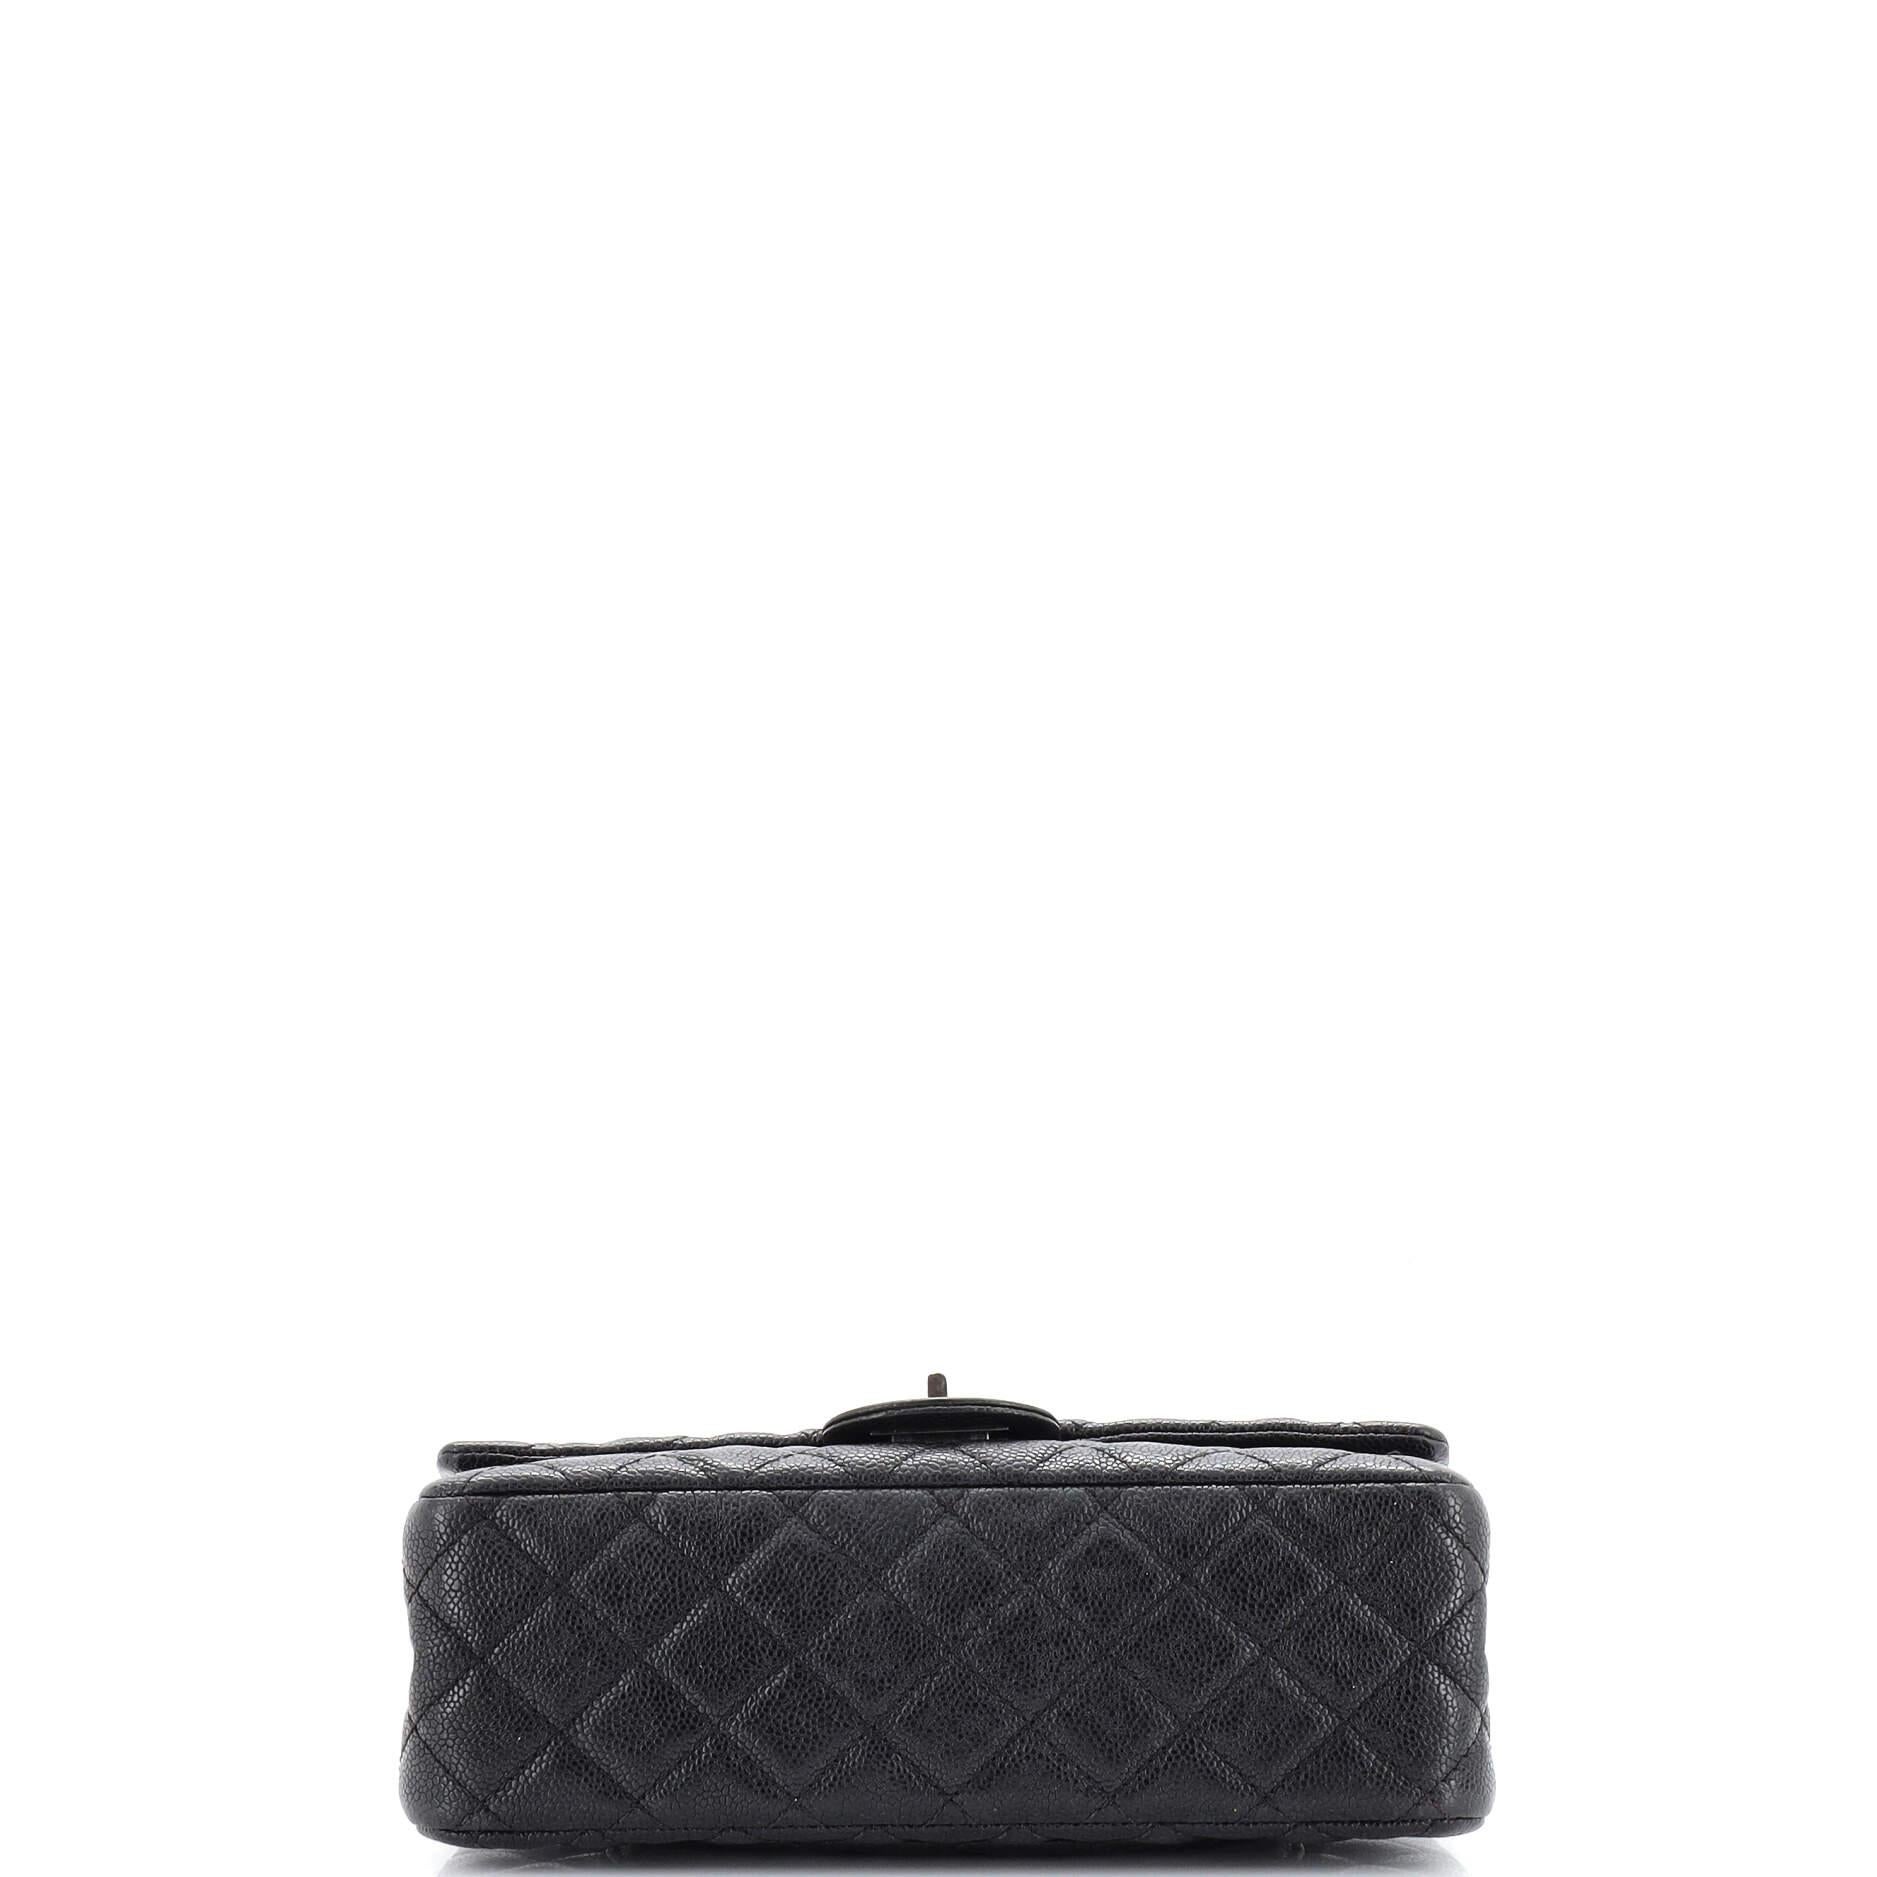 Women's or Men's Chanel Reissue 2.55 Flap Bag Quilted Caviar 225